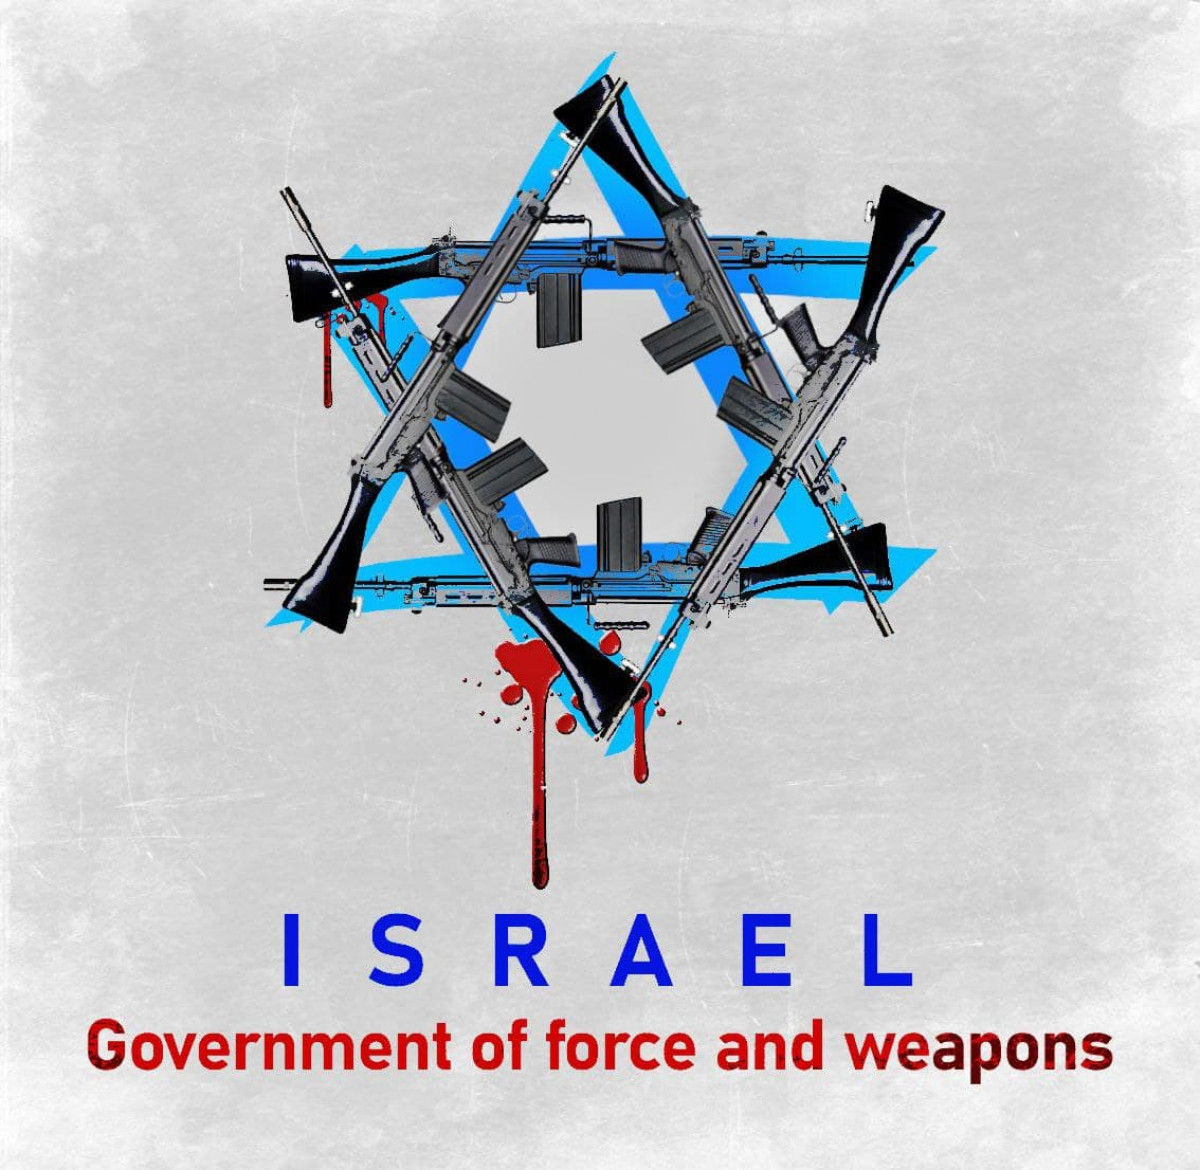 Israel Government of force and weapons